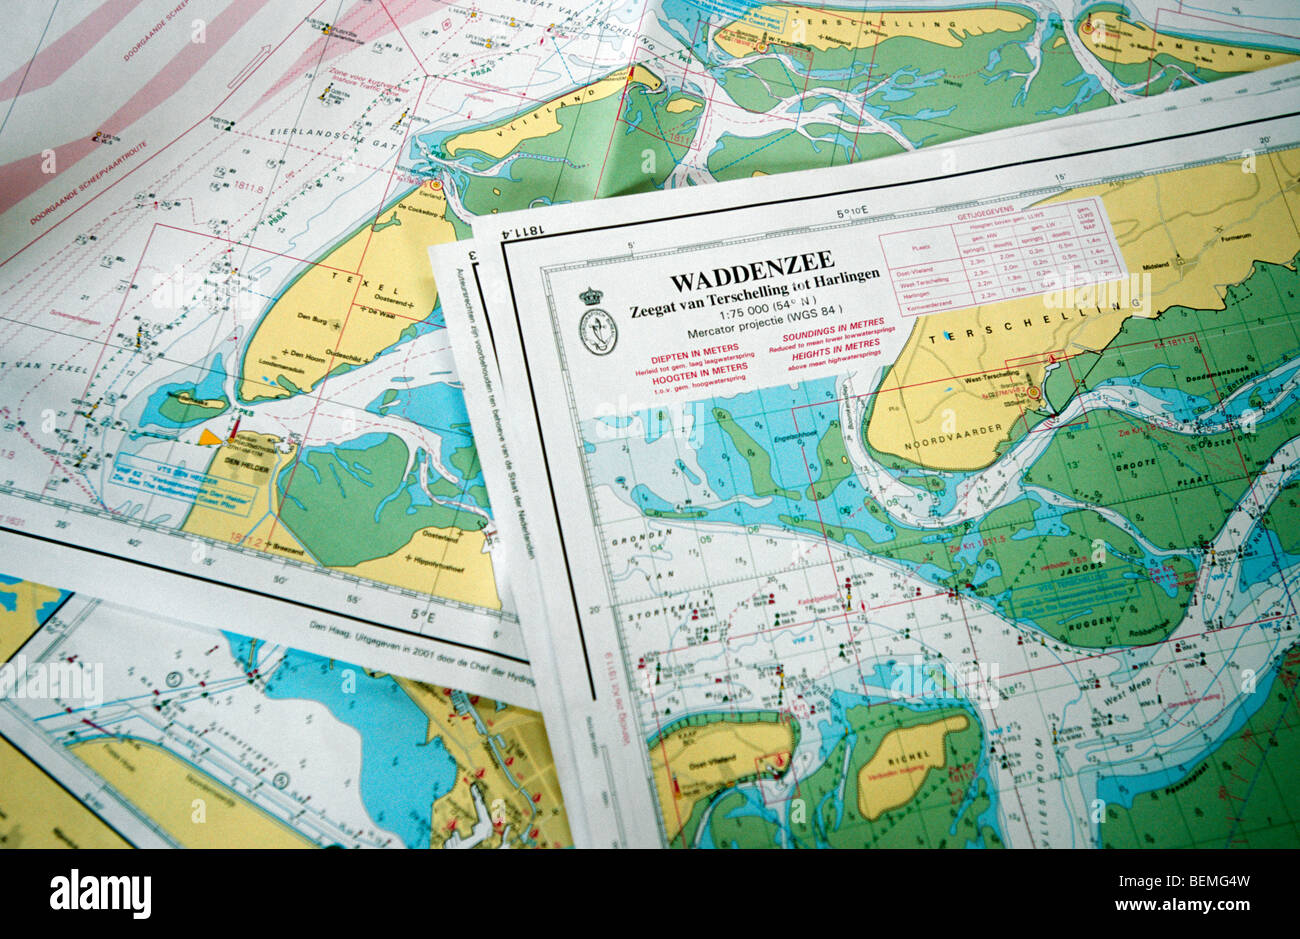 Nautical charts of the Wadden Sea, the Netherlands Stock Photo